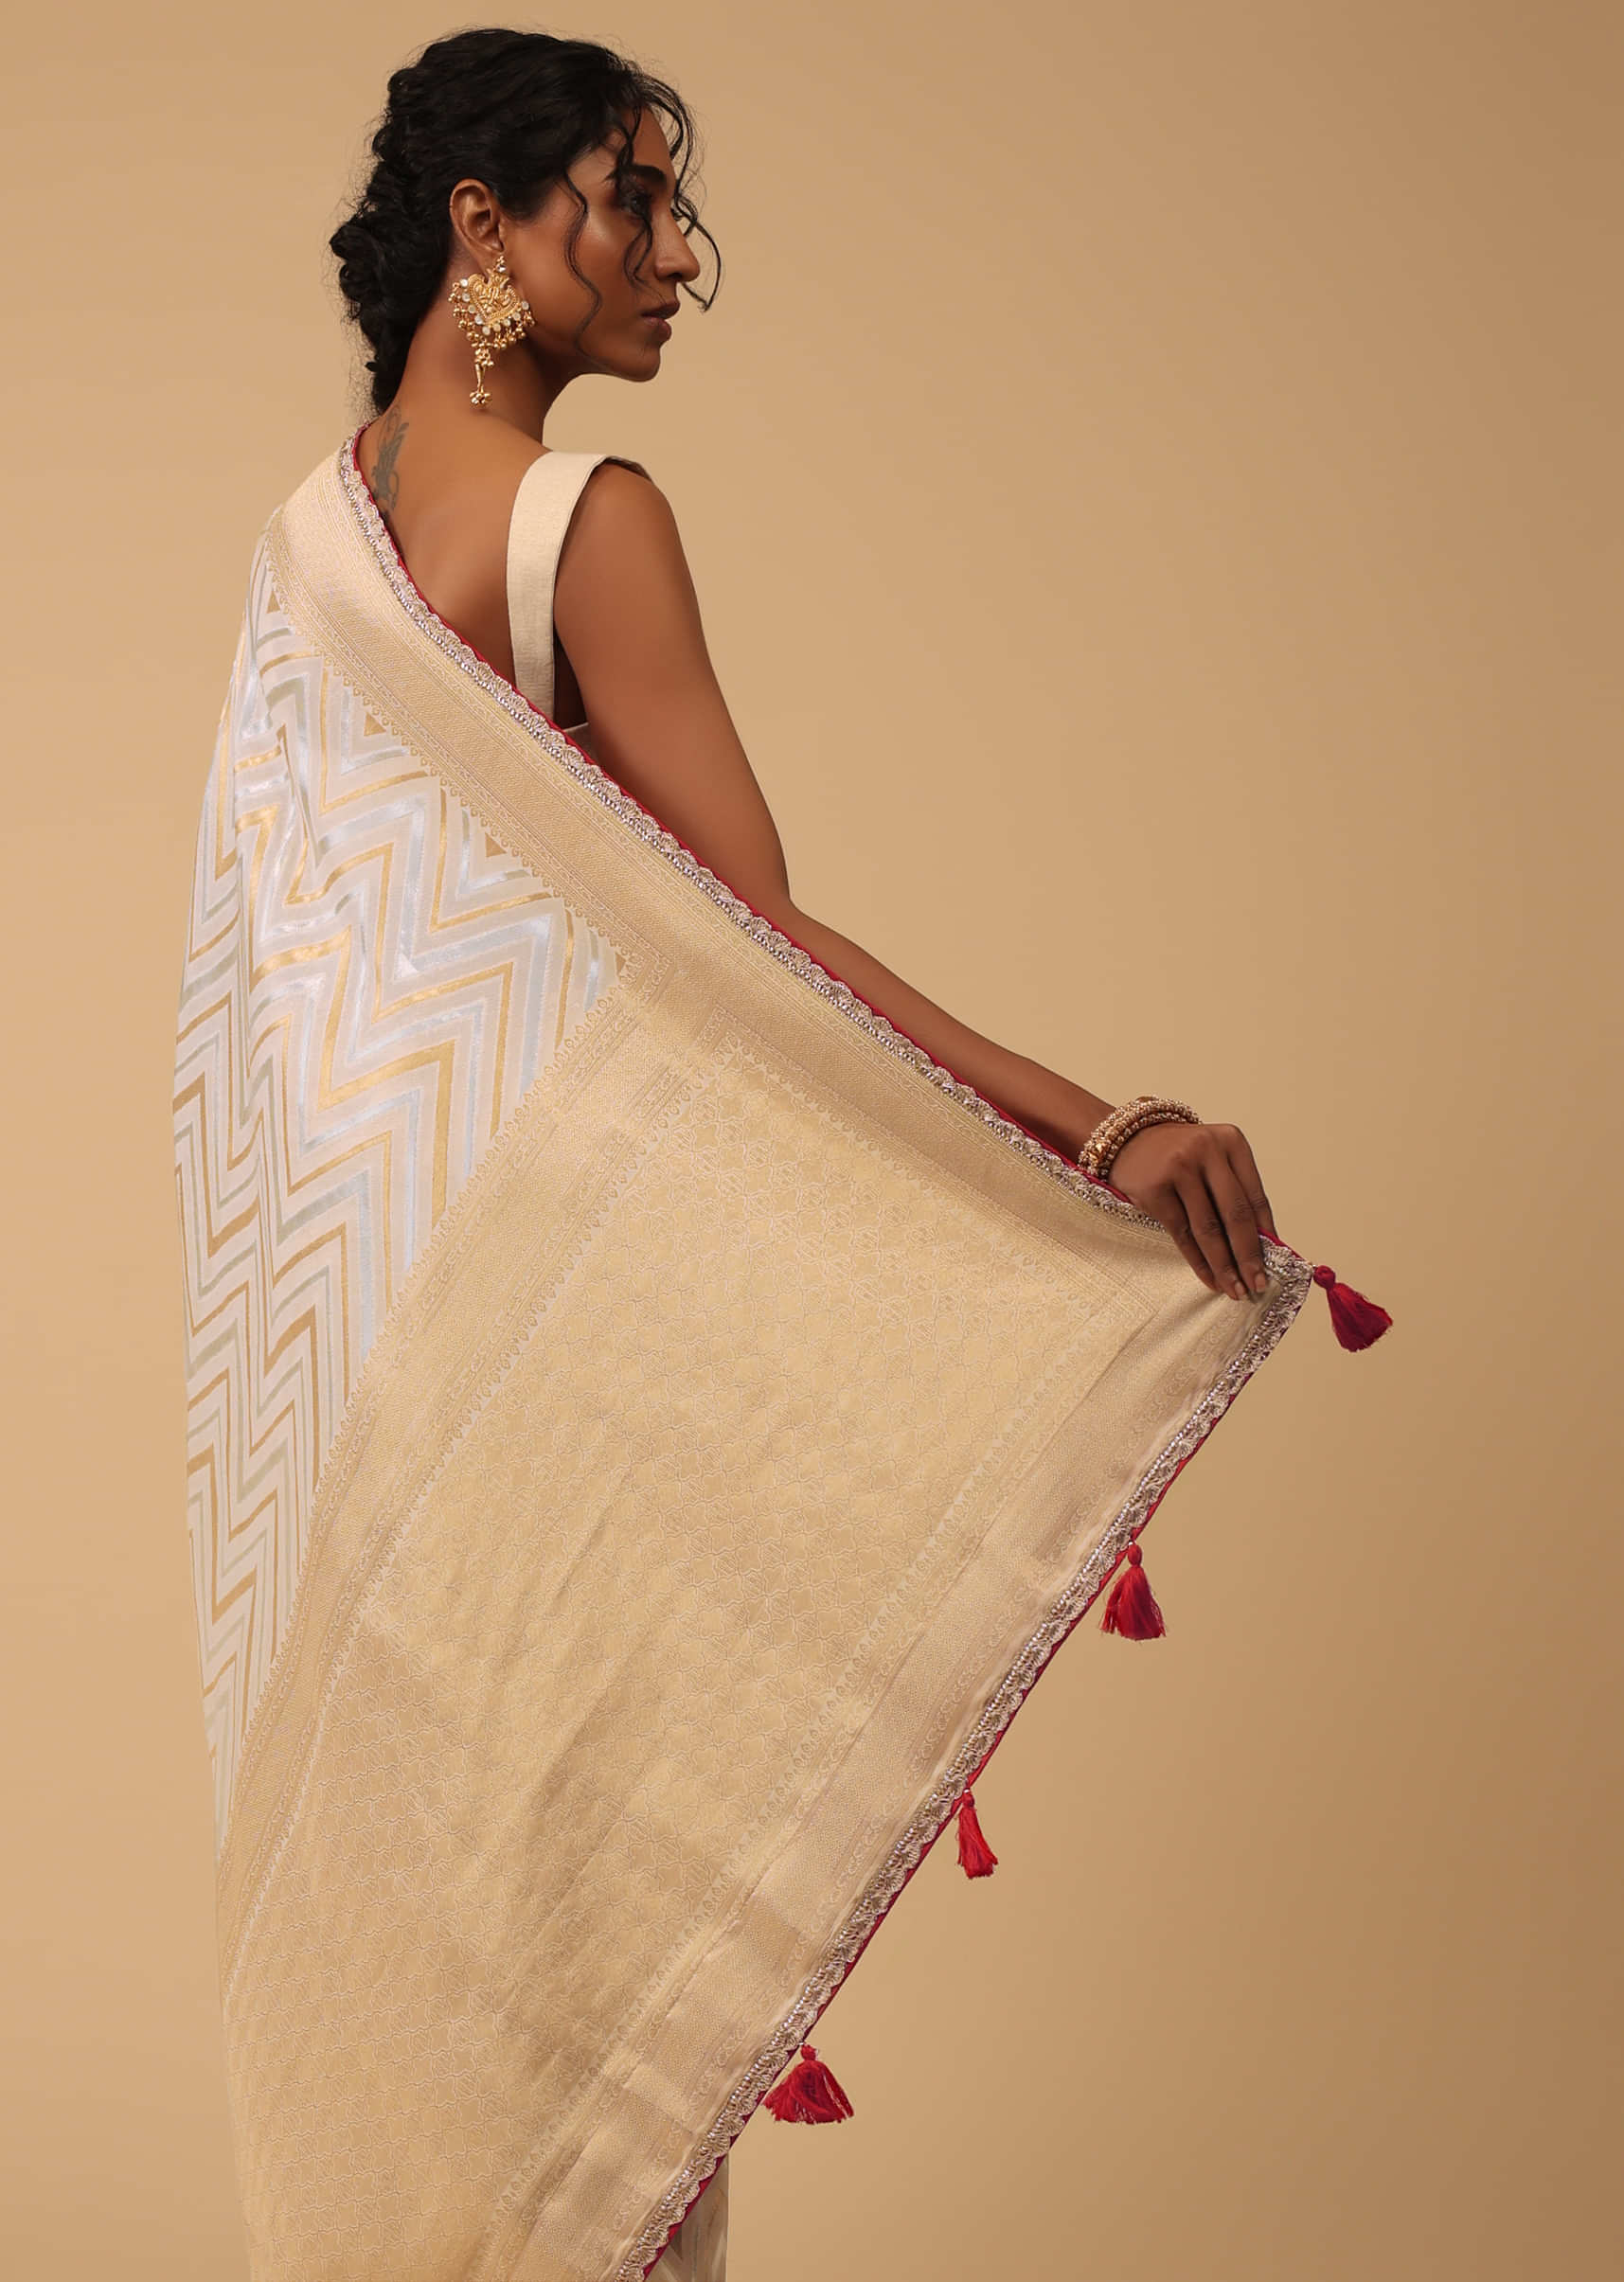 Ivory-White Saree In Tissue With Gold Zari Weave